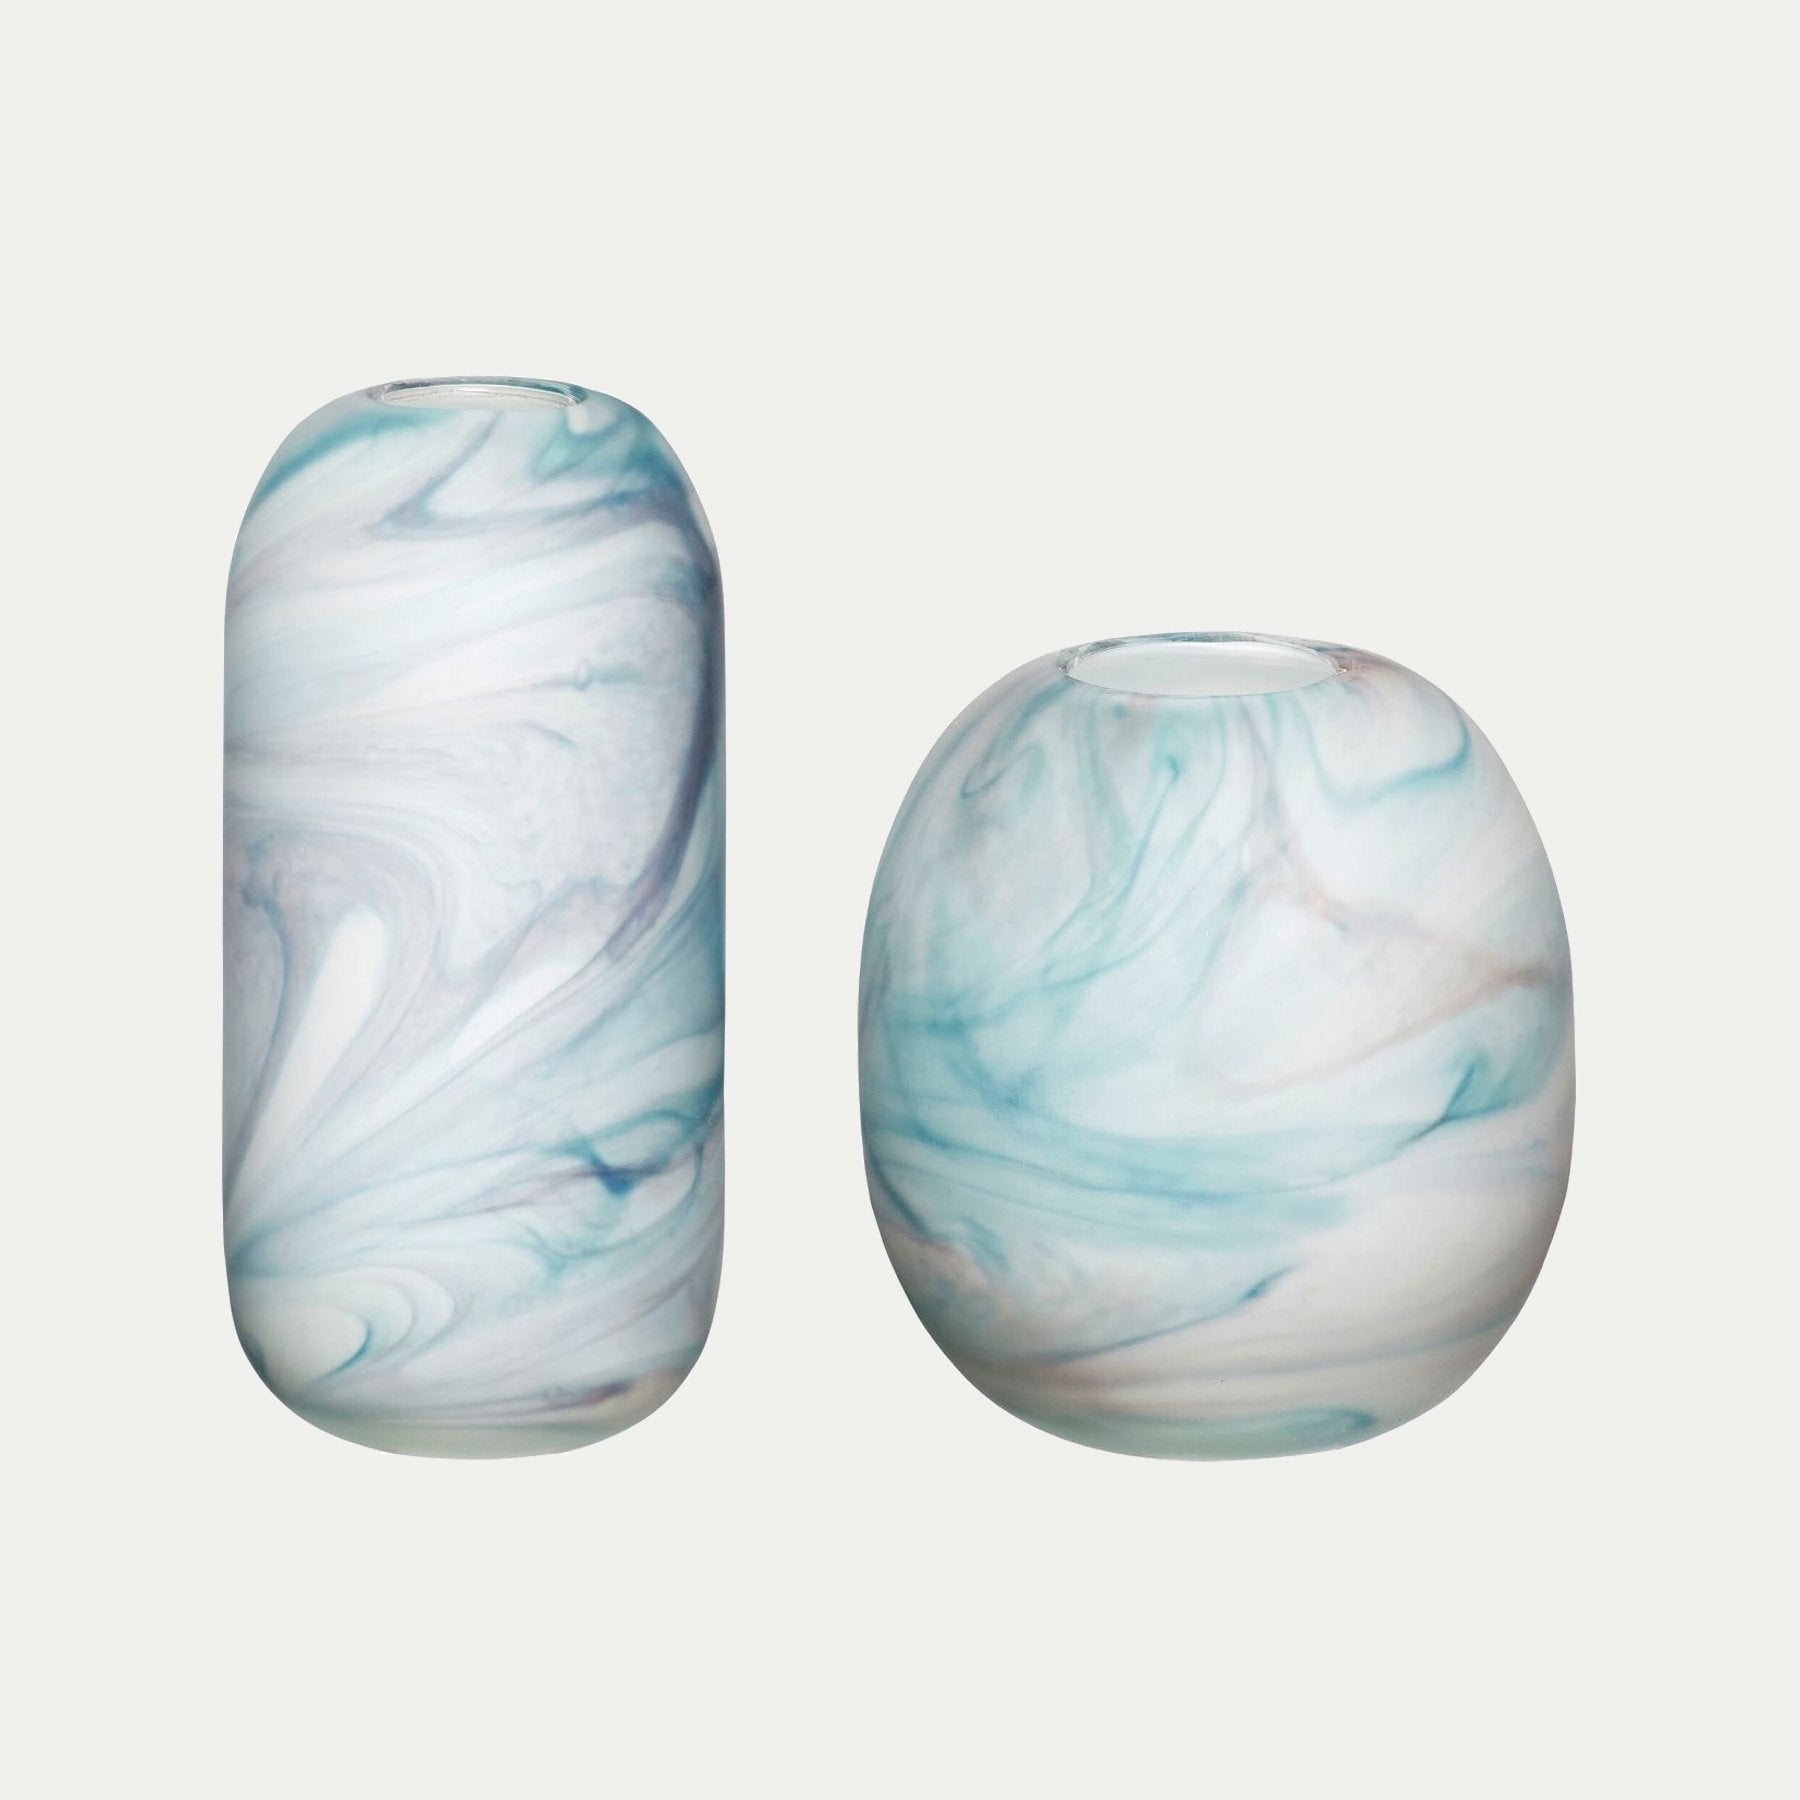 Hubsch Interior Scandi style marbled vases in white and blue glass on white background